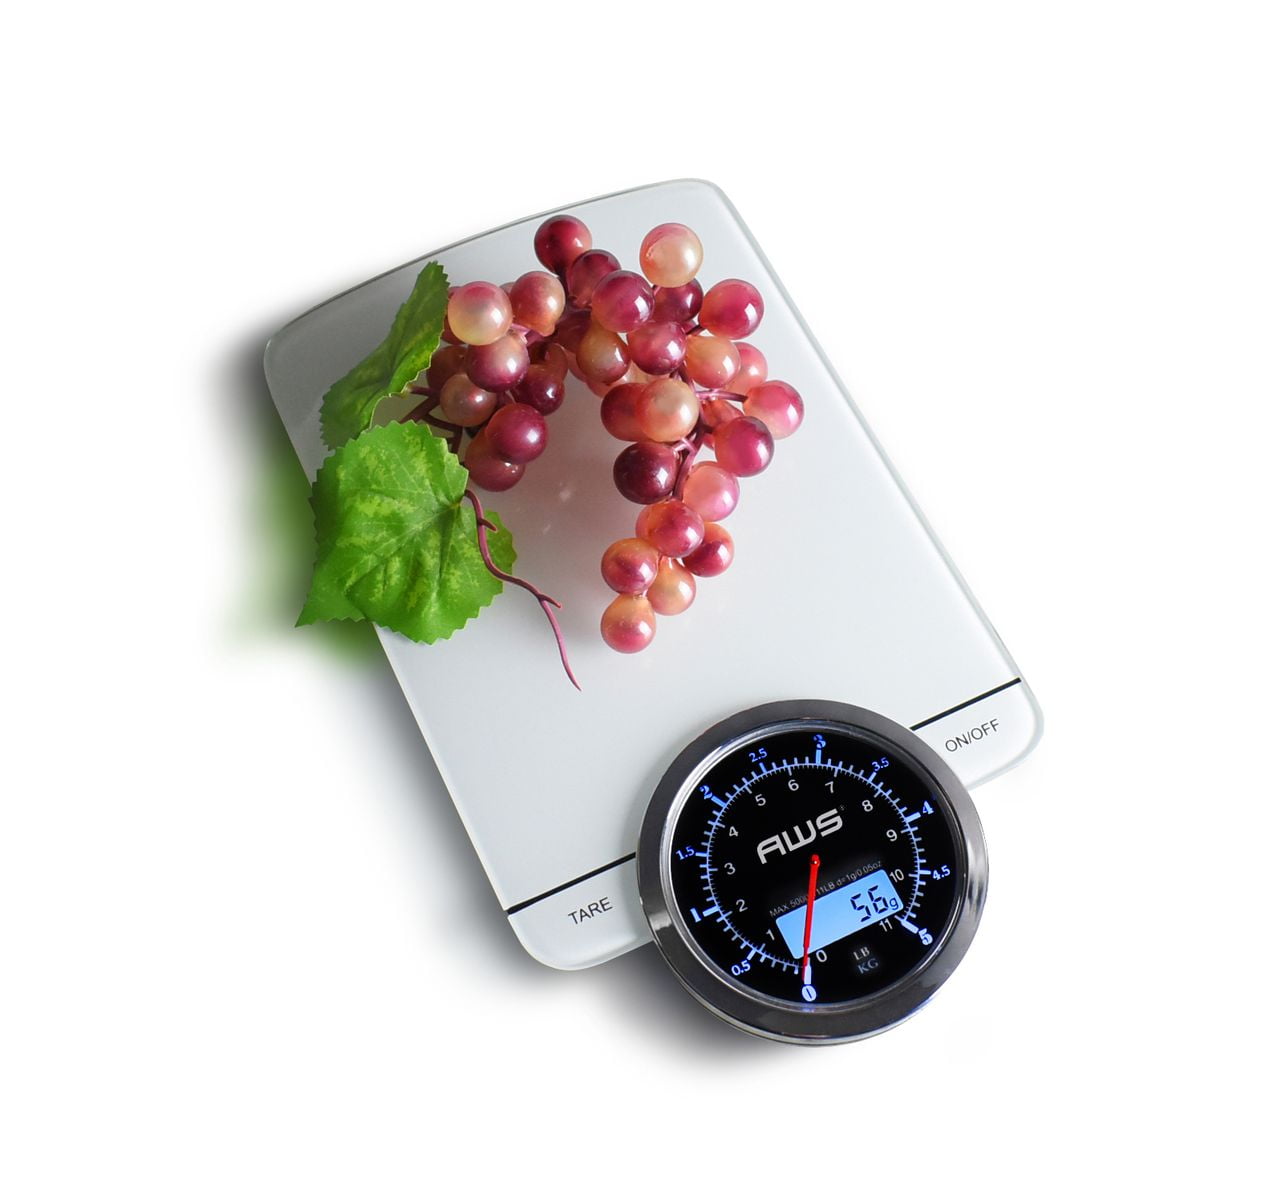 American Weigh Scales Vanilla Series Kitchen Scale High Precision Large  Backlit LCD Display 11LB Capacity